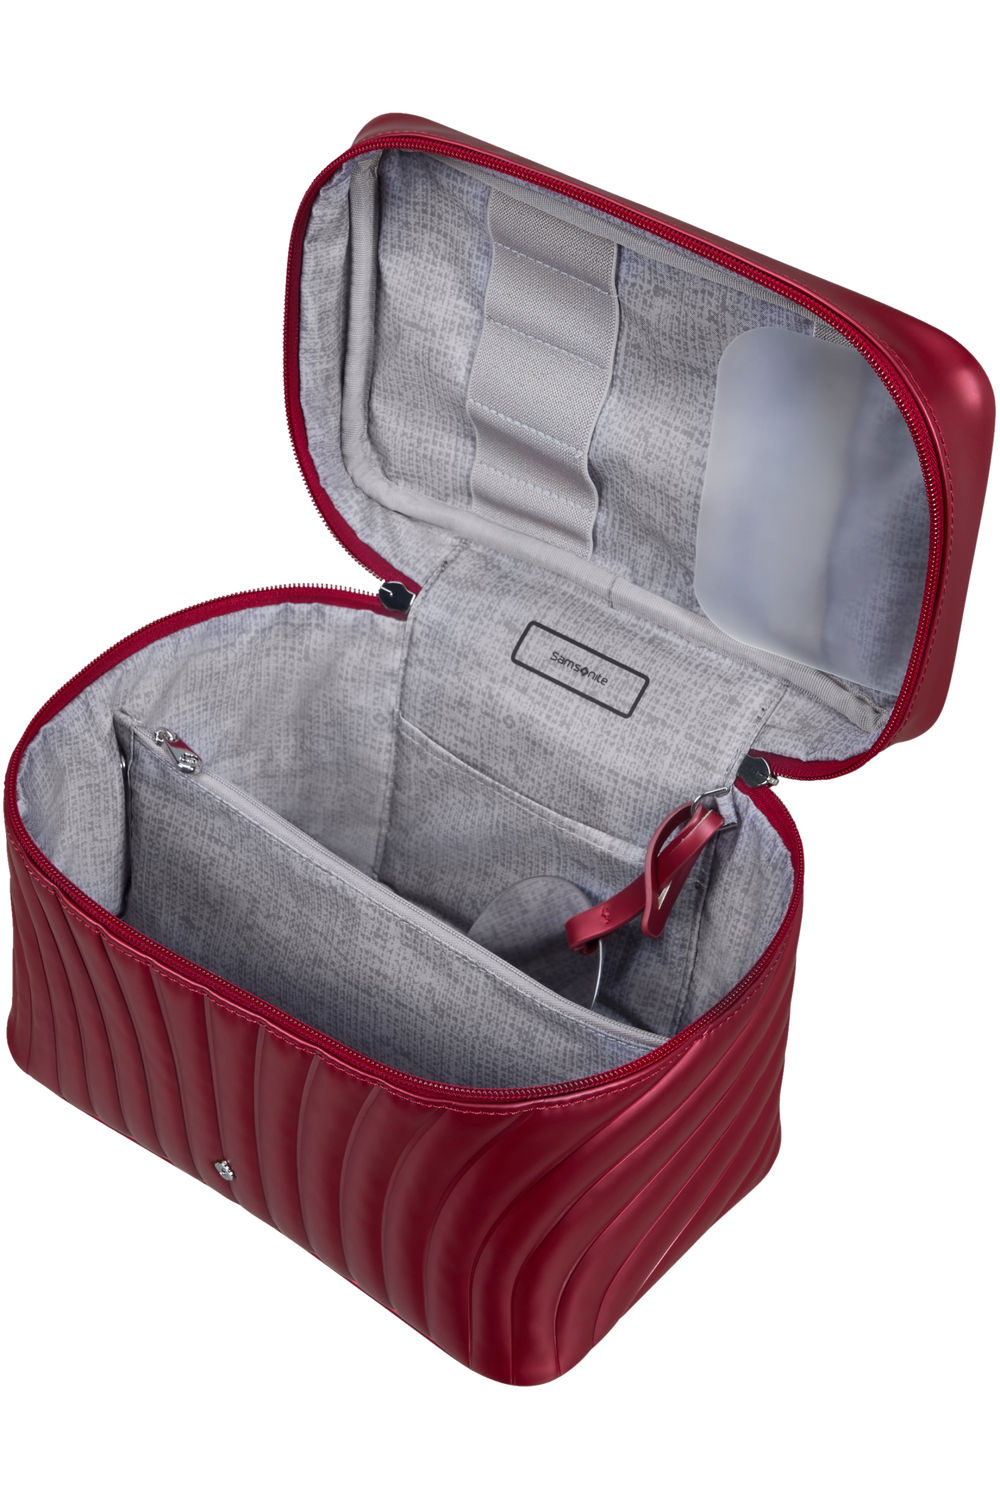 C-LITE  Beauty case   chili red